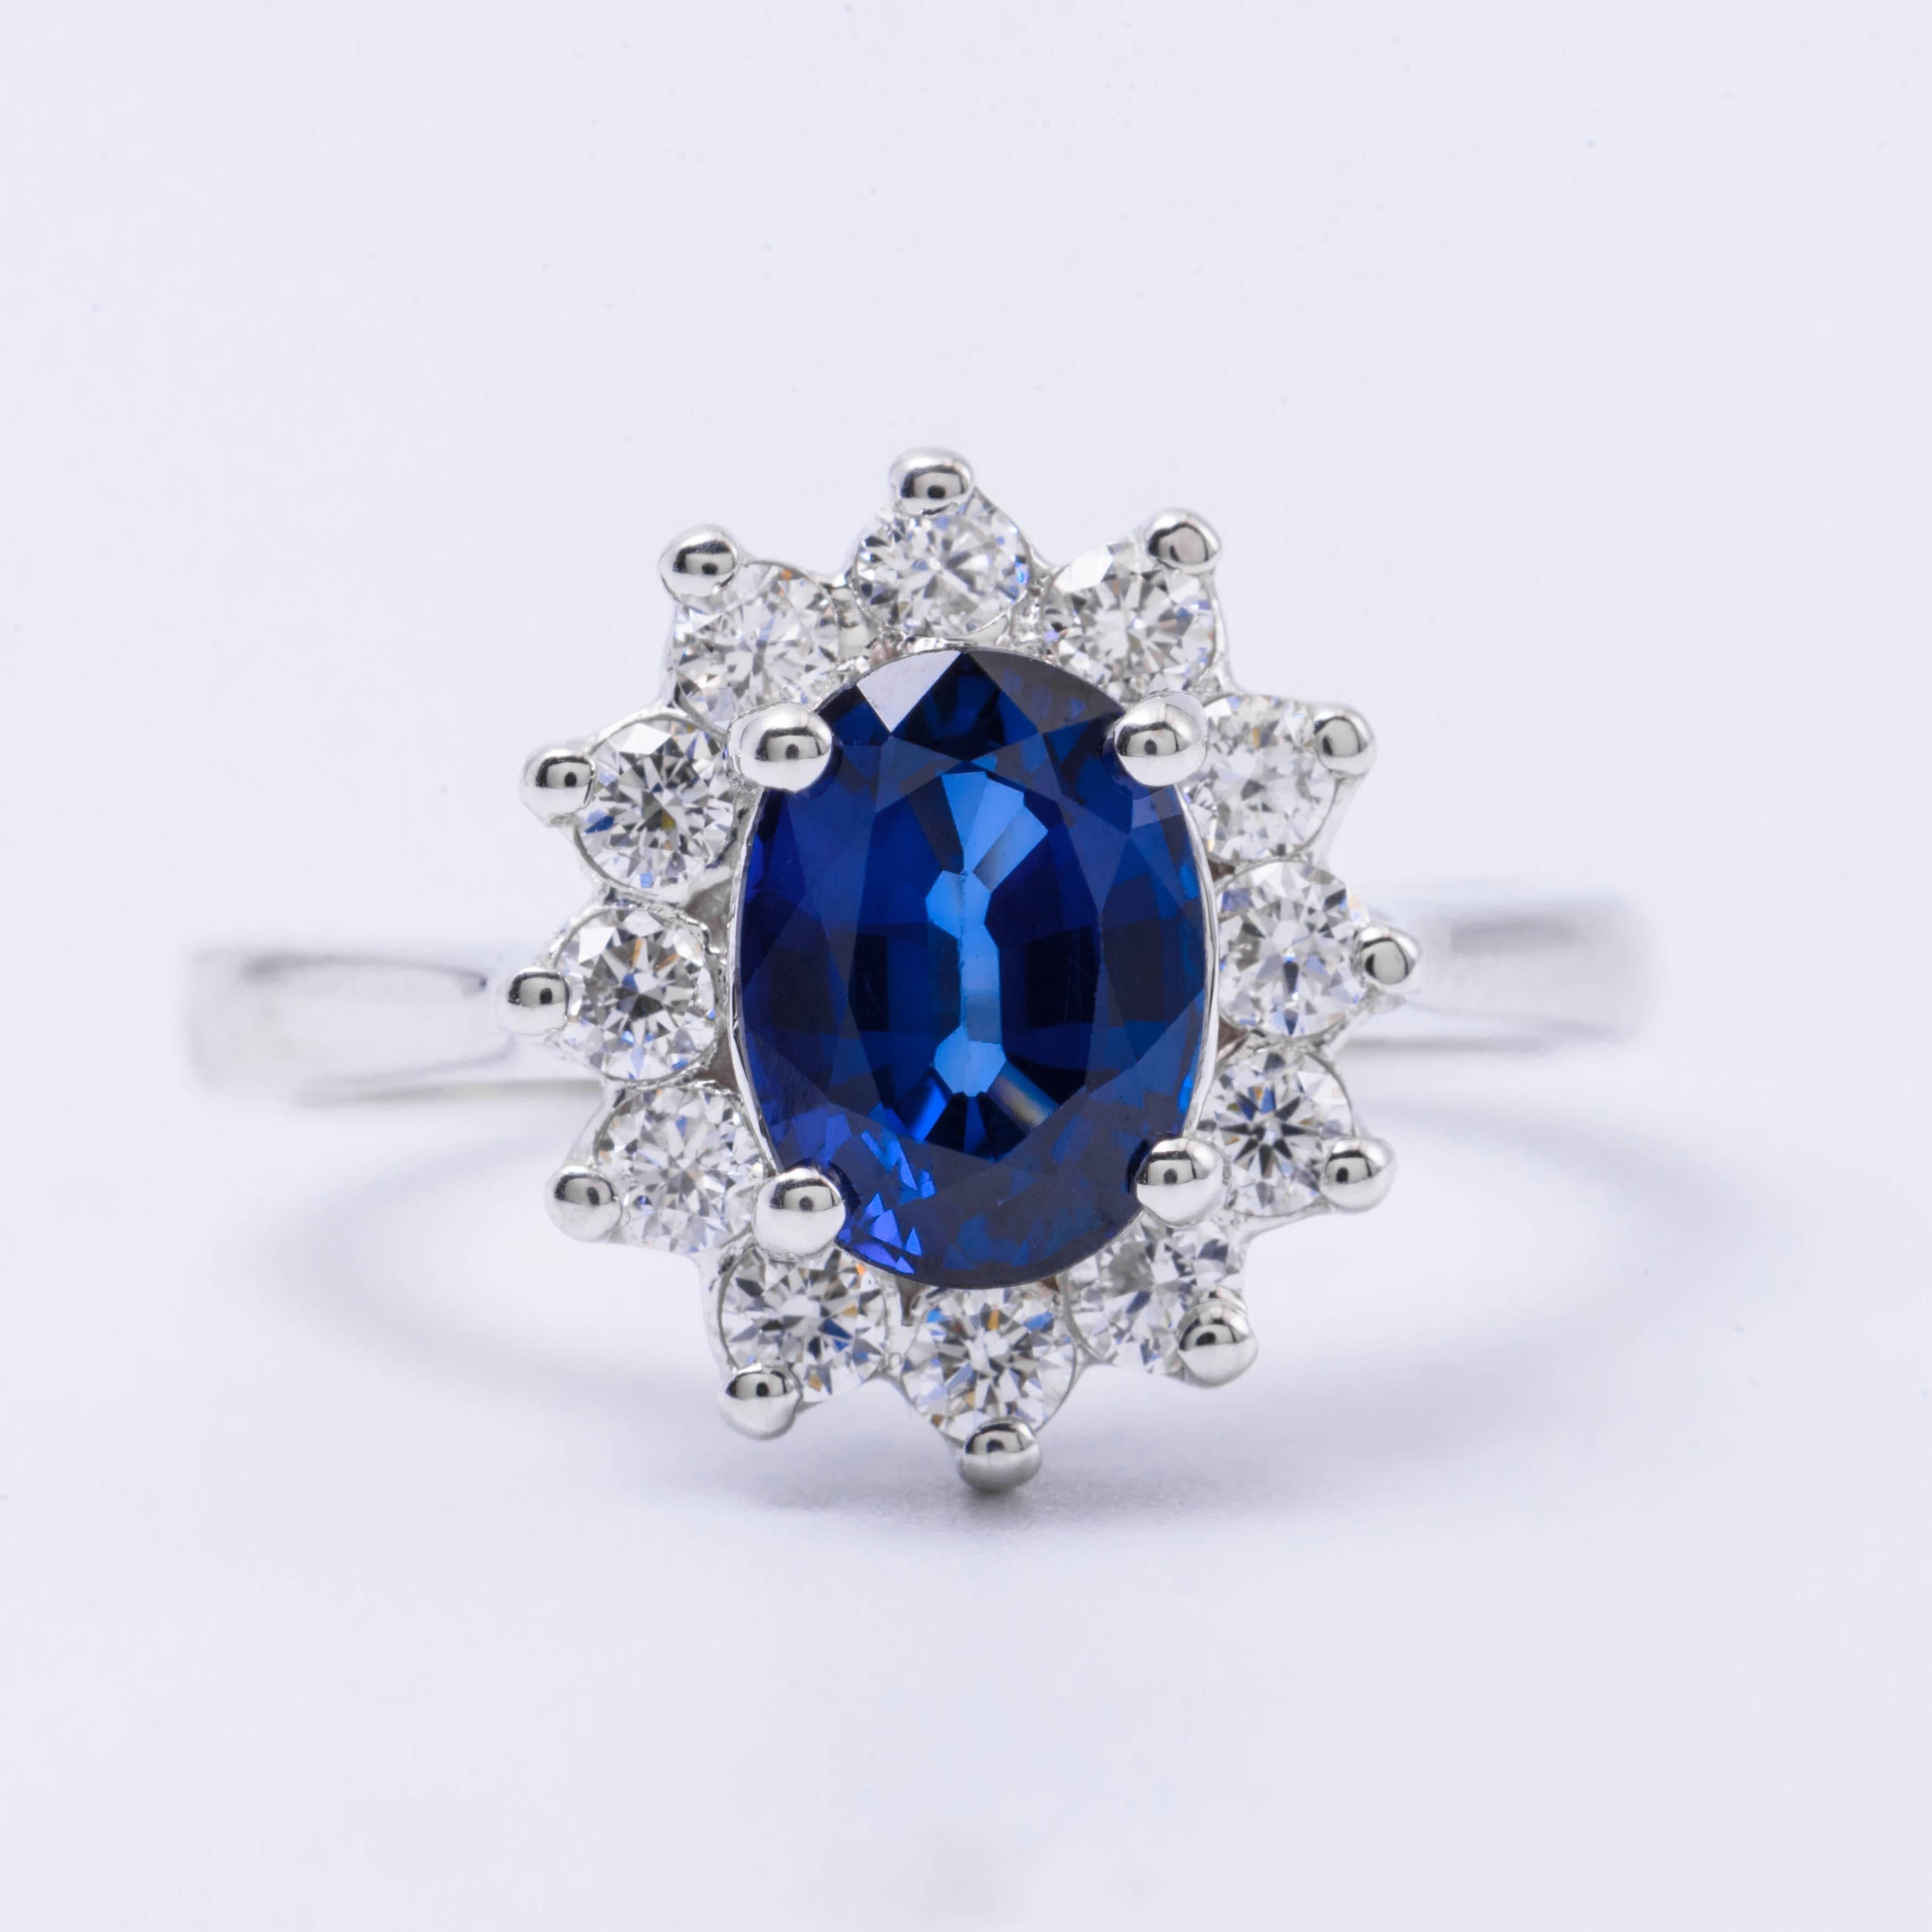 The oval sapphire in this ring has a total carat weight of 1.79 carats. The diamonds have a total carat weight of 0.47 carats.
All our Gemstones are genuine, and are sourced with the highest degree of integrity.